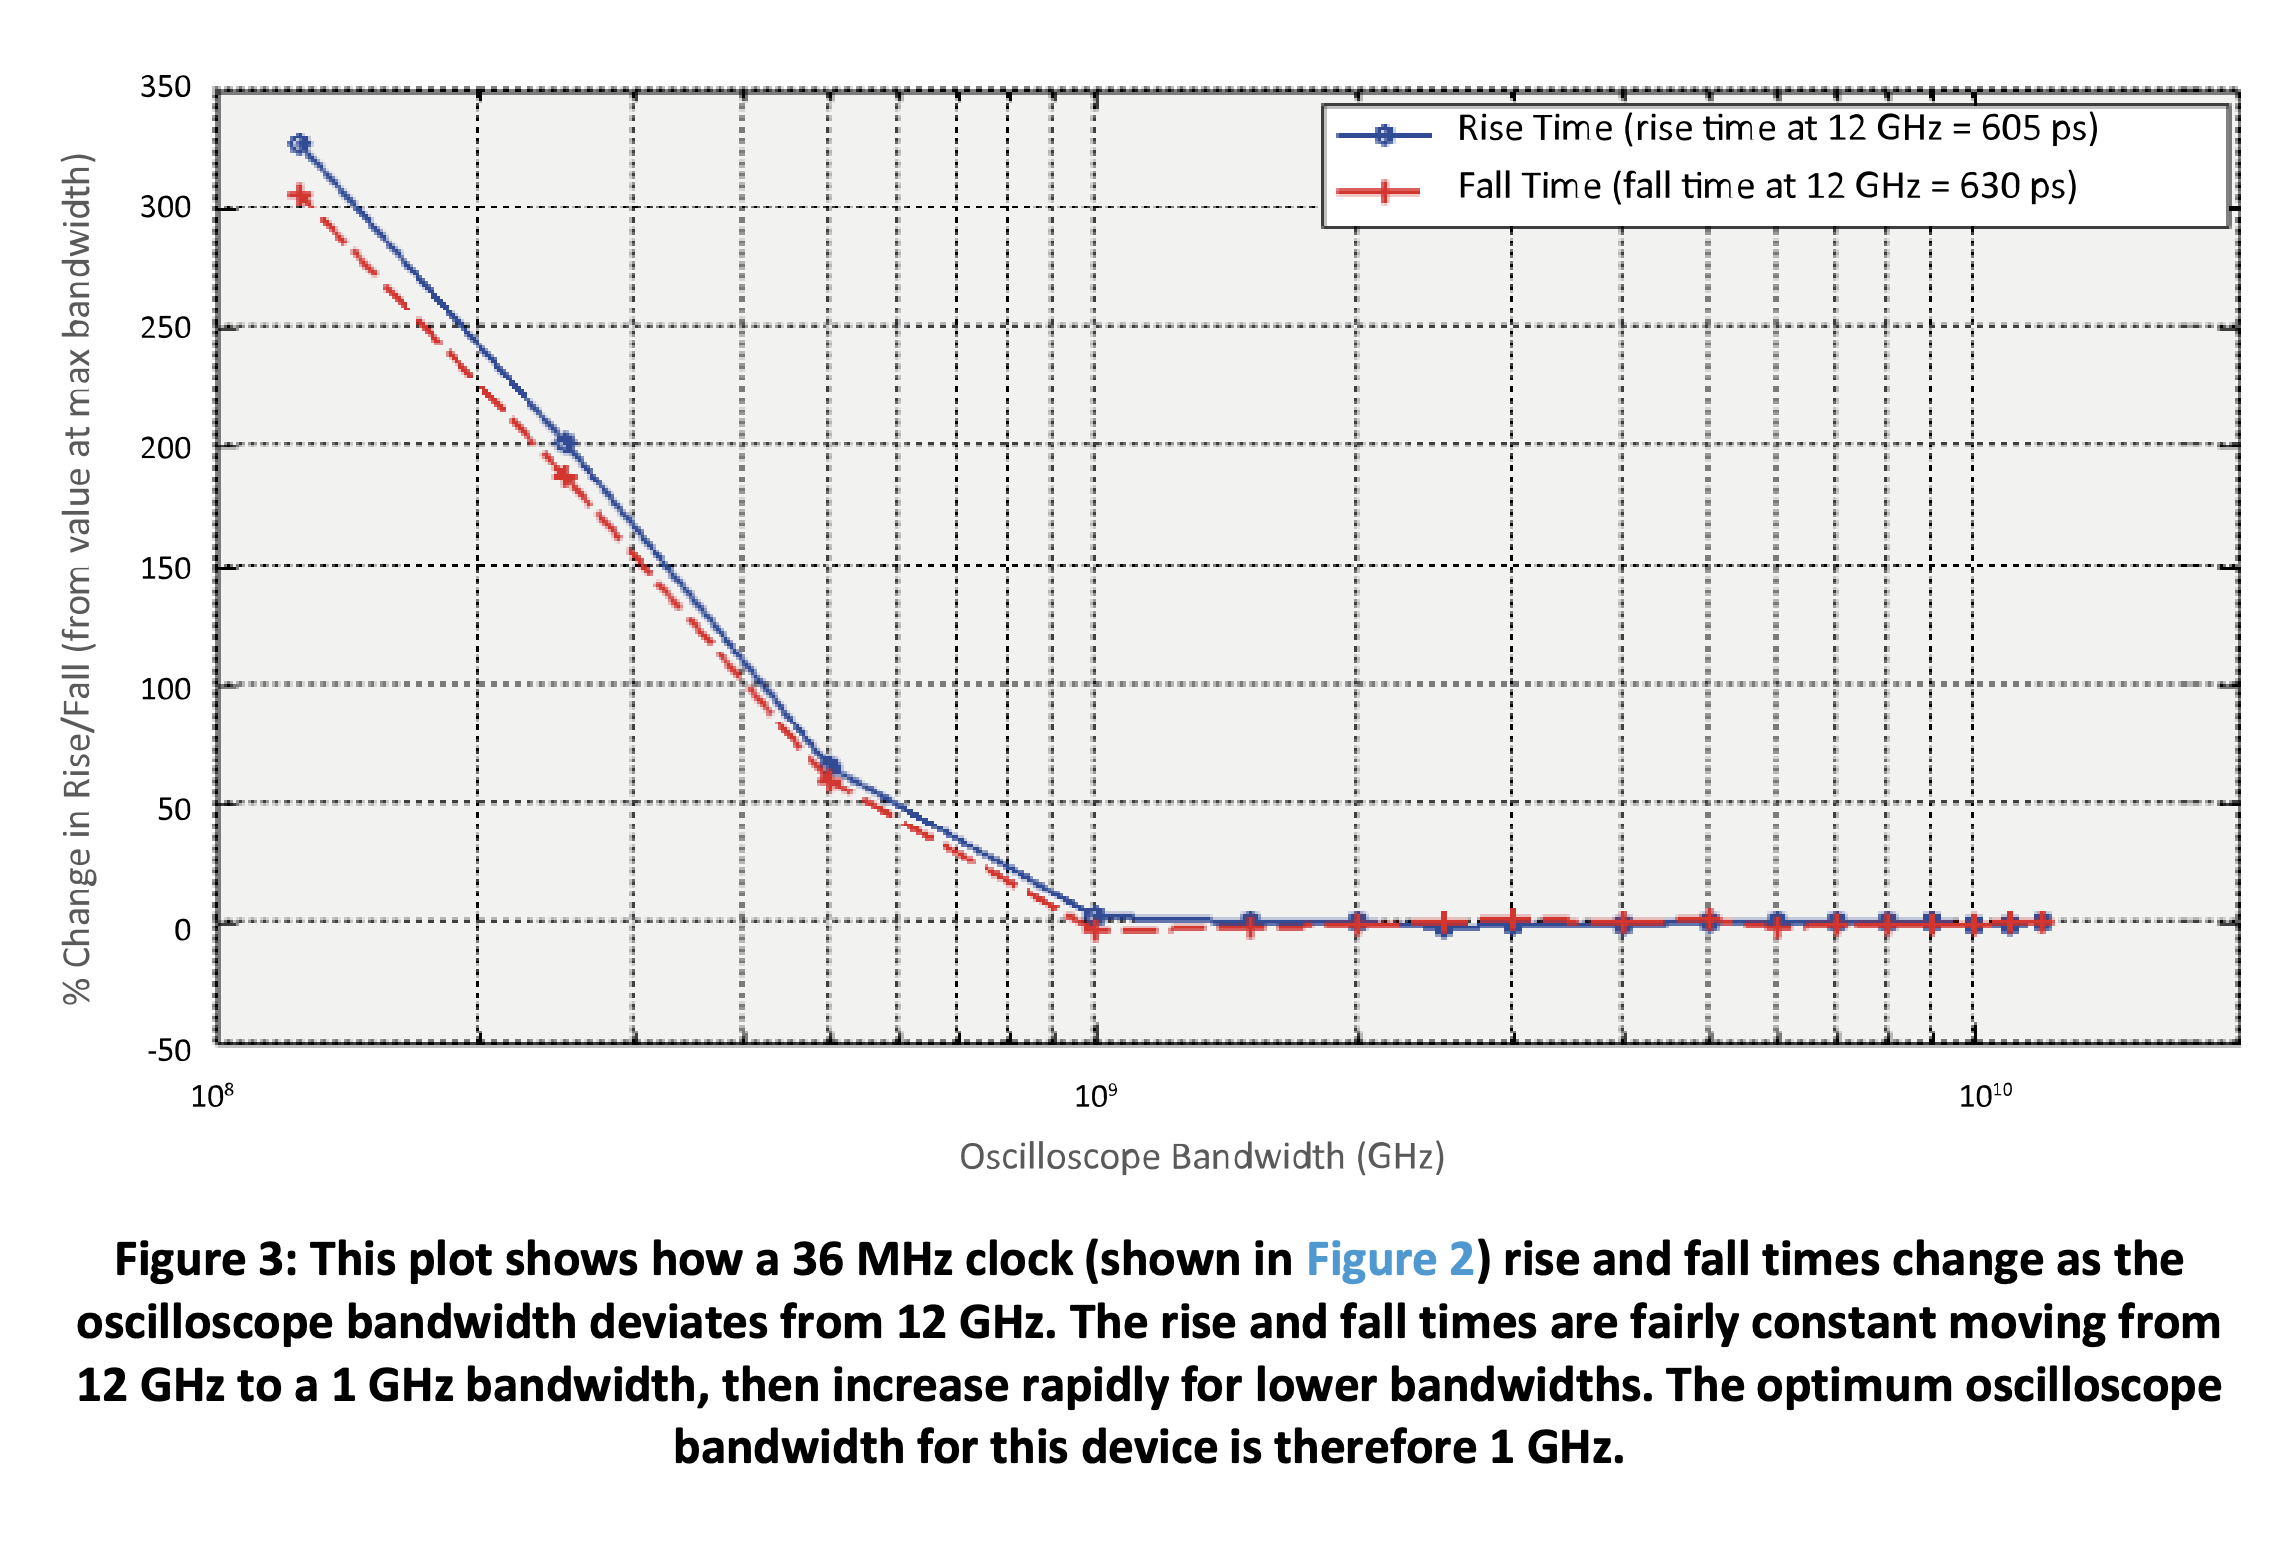 Figure 3 Plot shows how a 36 MHz clock rise and fall times change